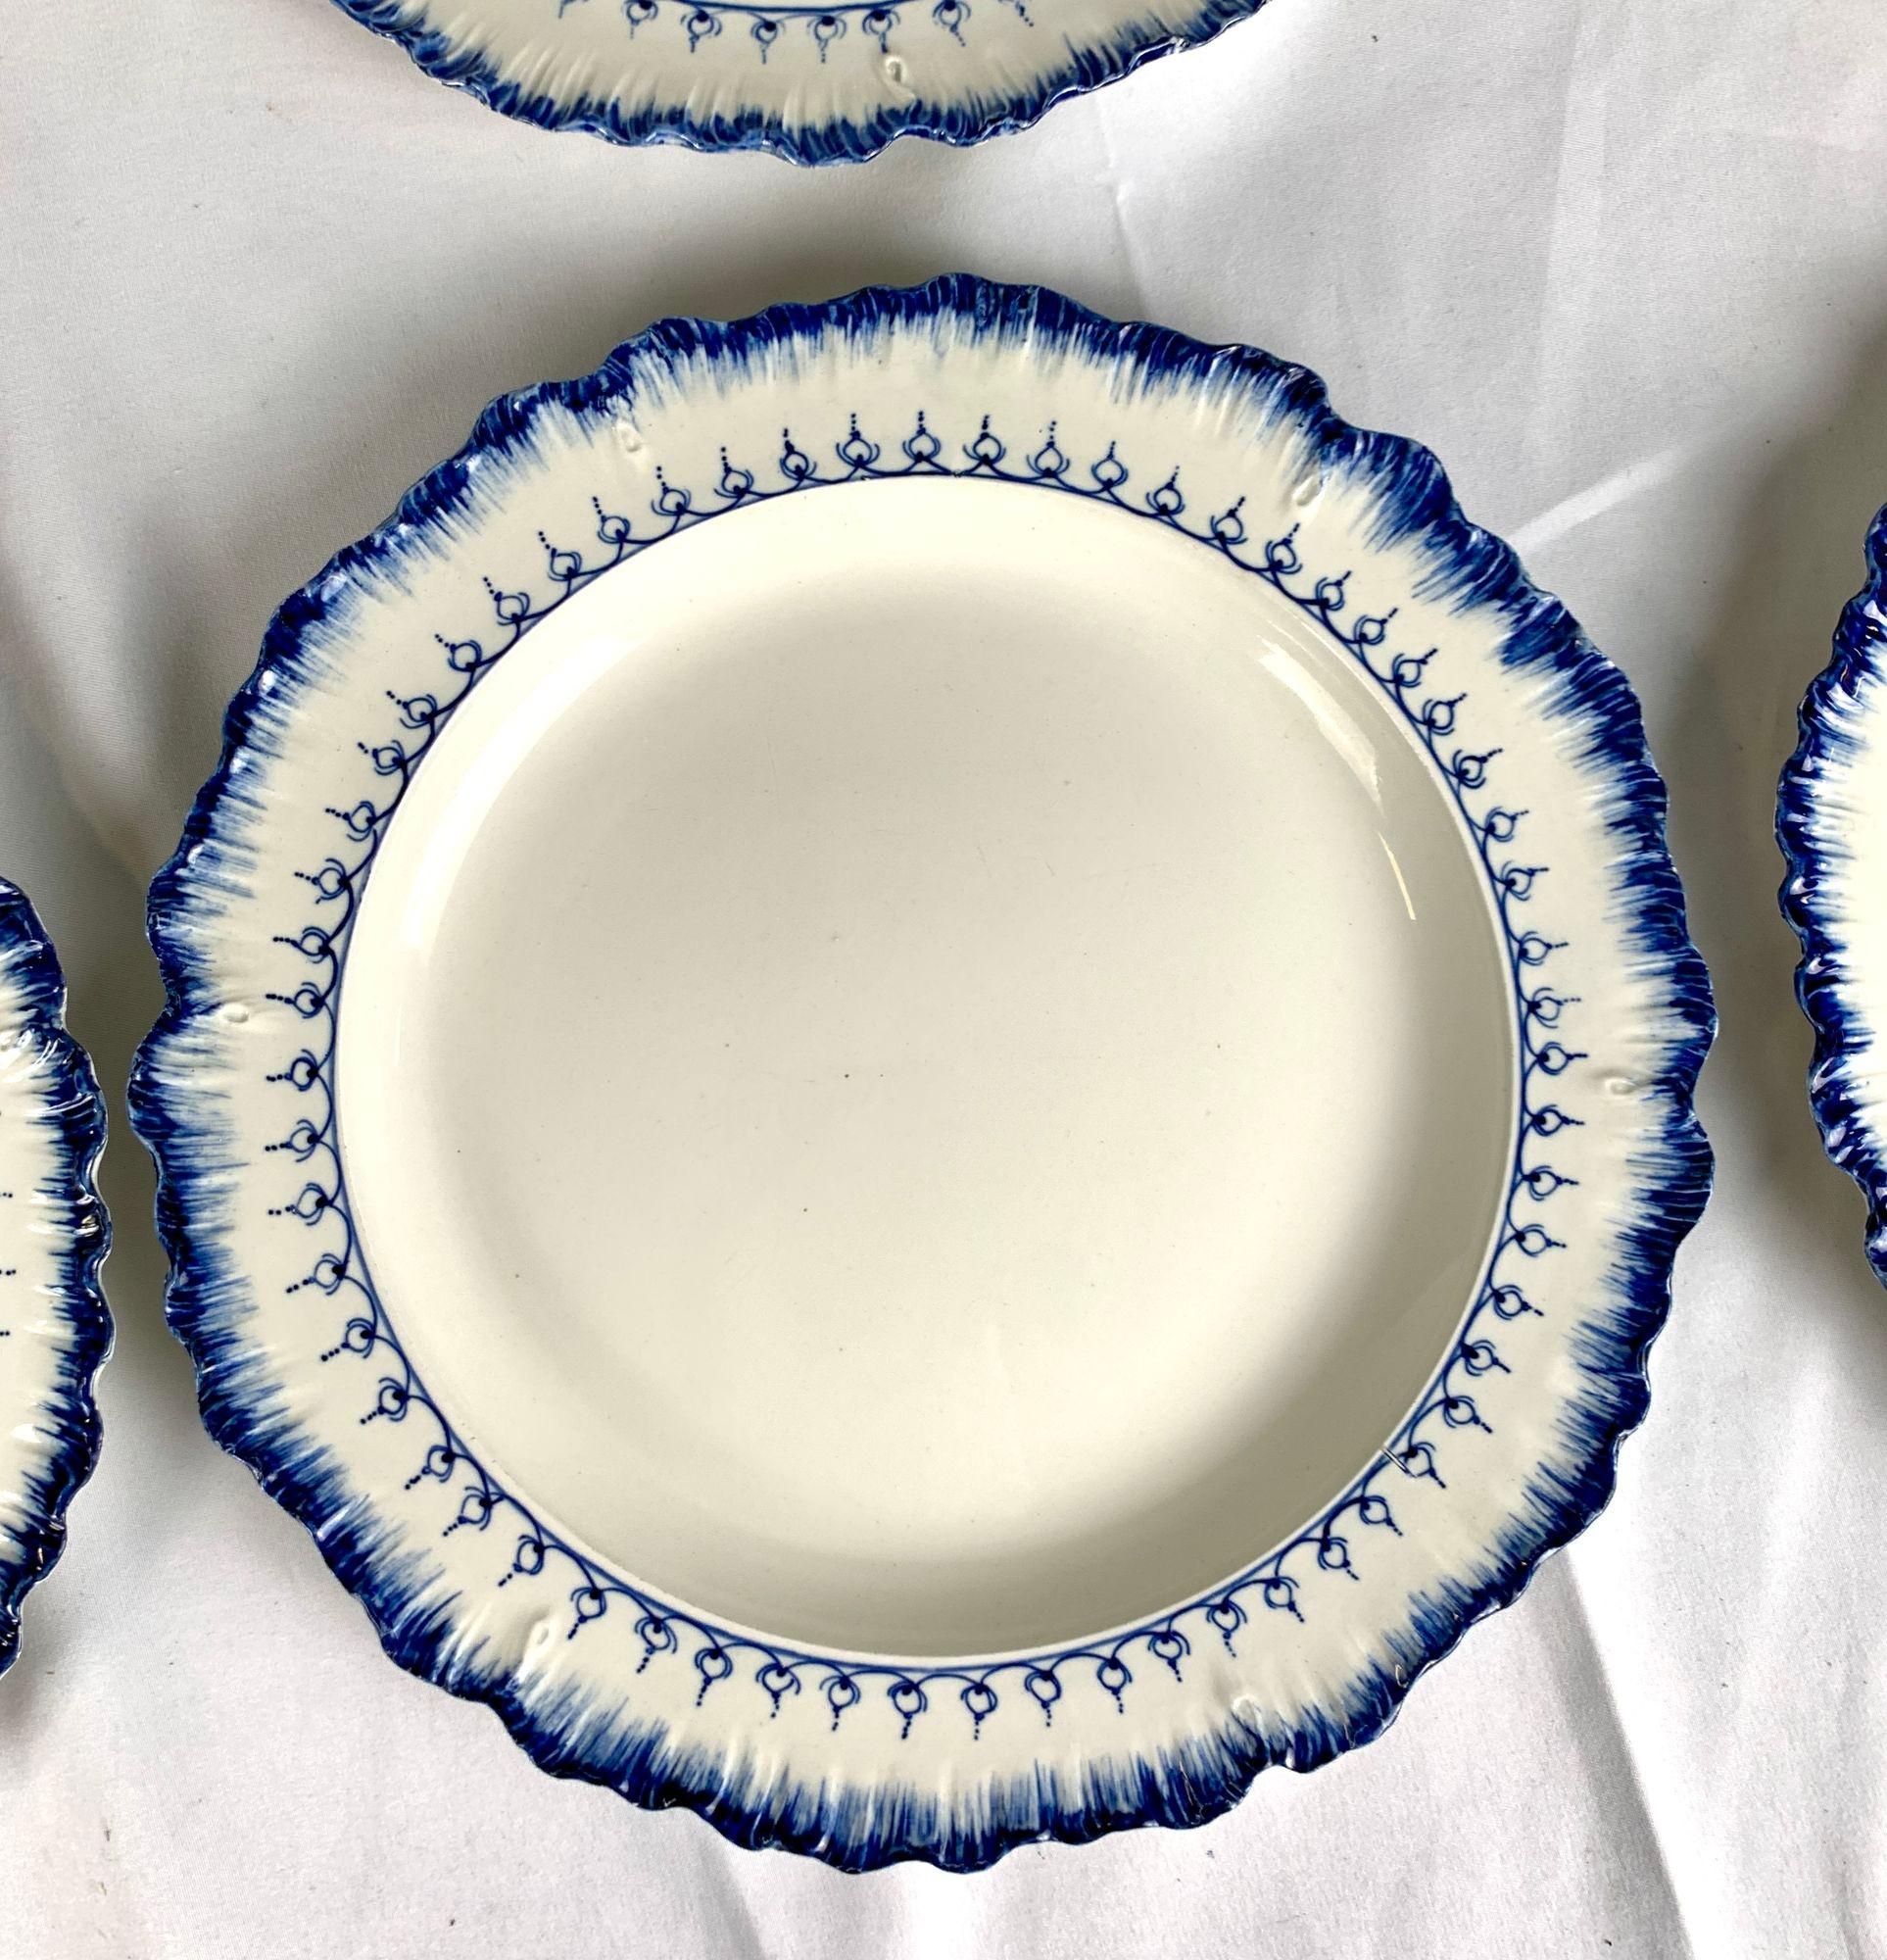 English Set Eight Wedgwood Dinner Plates Mared Pattern Made England Circa 1840 For Sale